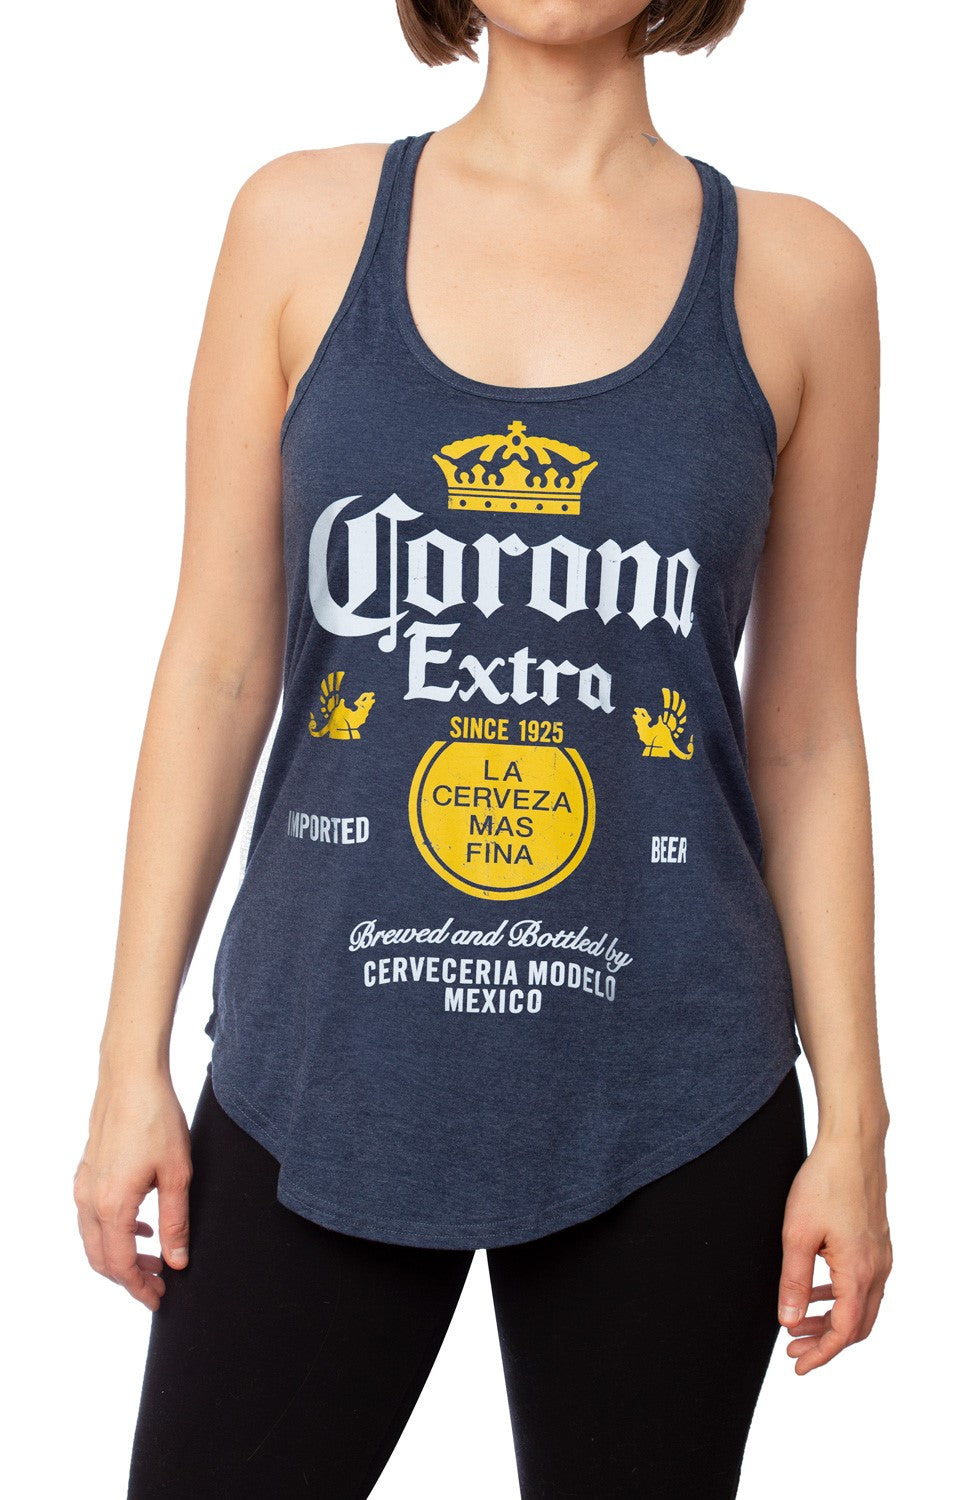 Corona Extra Label Tank Top for Women Front View.